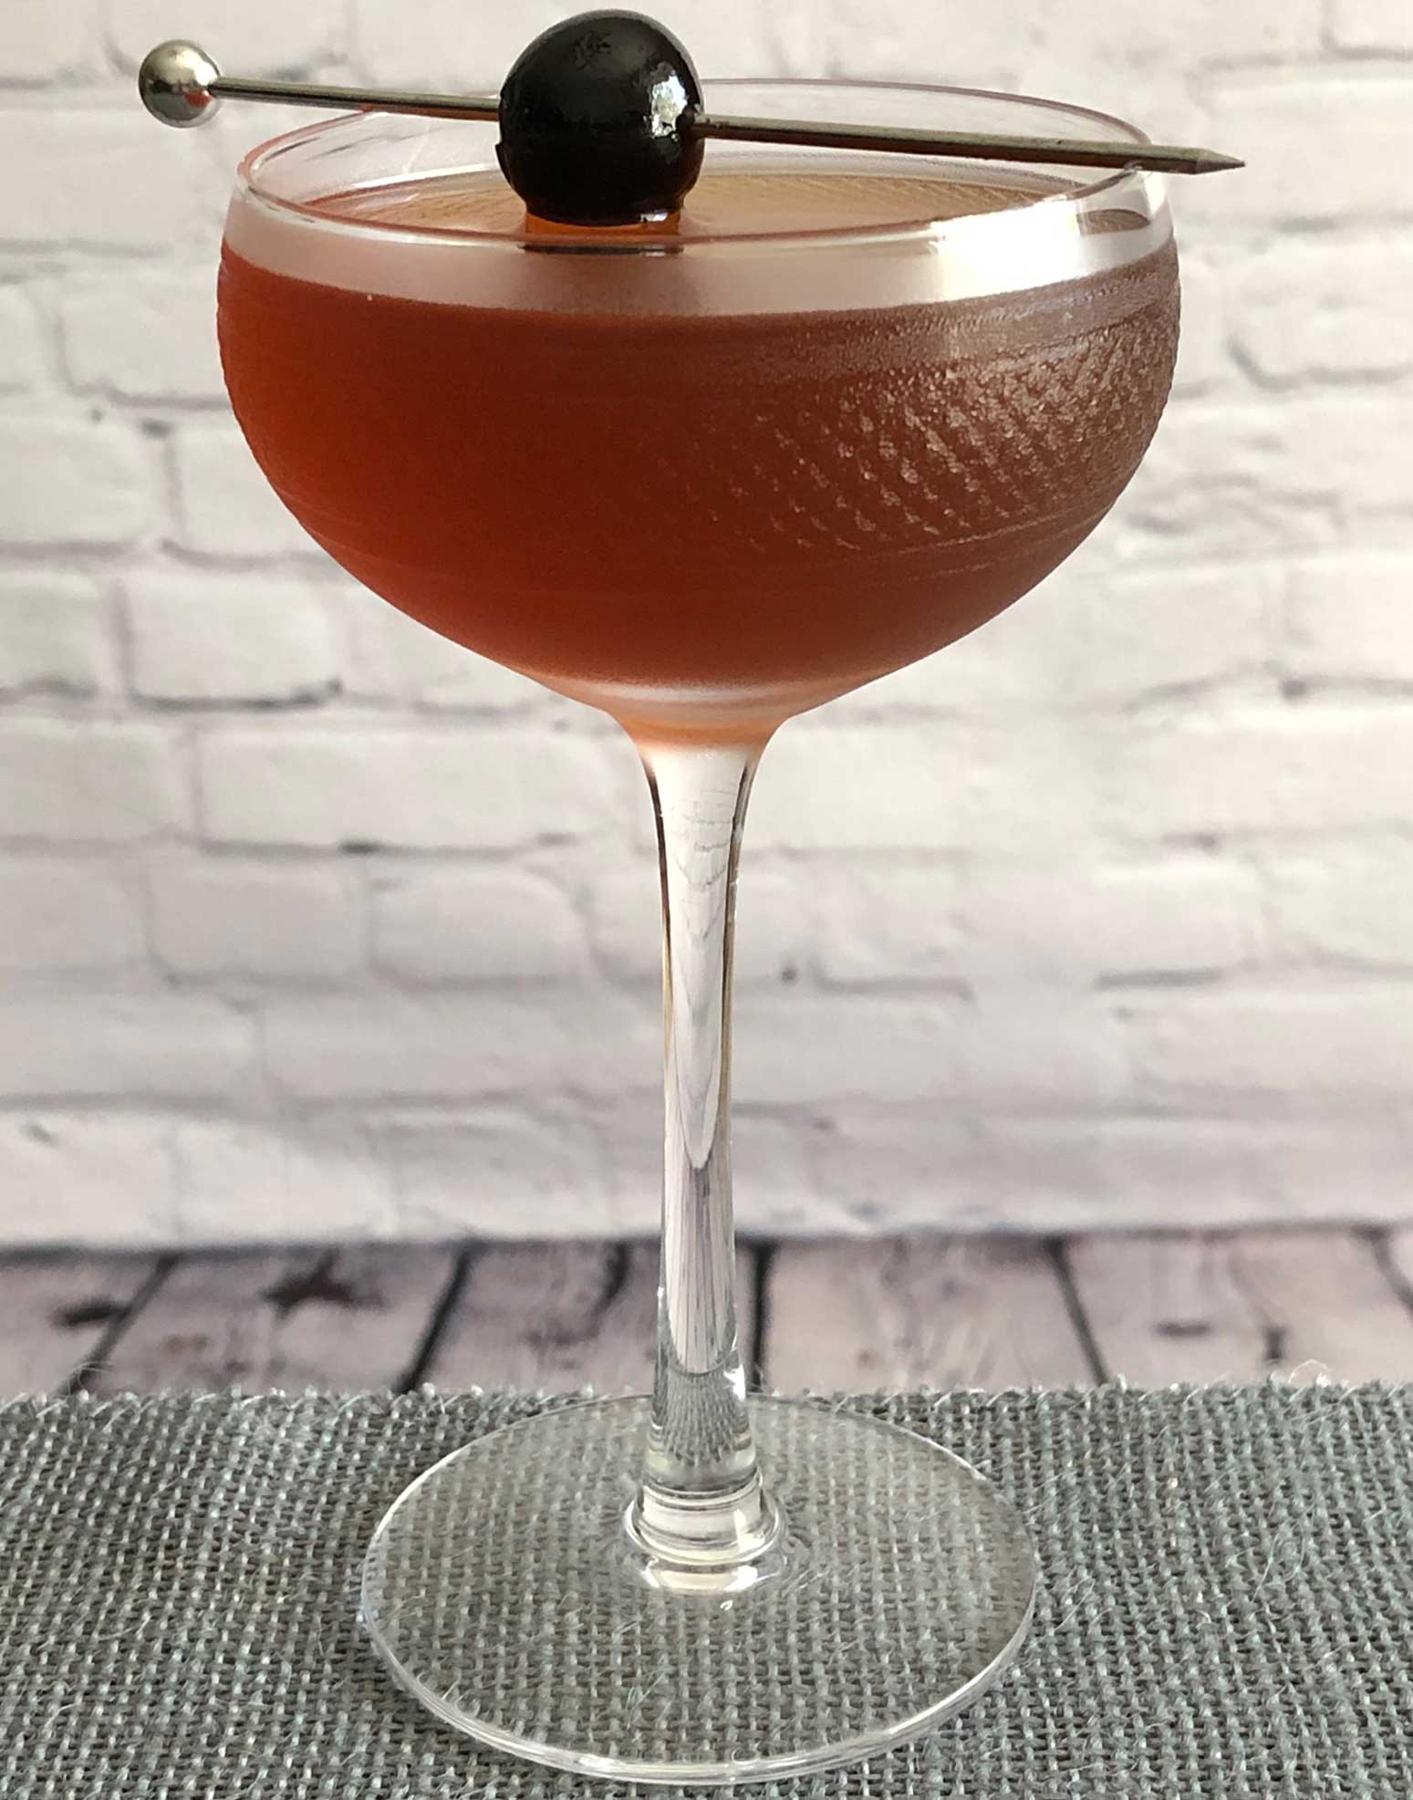 An example of the Remember the Maine, the mixed drink (drink) featuring rye whiskey, Cocchi Vermouth di Torino ‘Storico’, Rothman & Winter Orchard Cherry Liqueur, absinthe, and maraschino cherry; photo by Lee Edwards